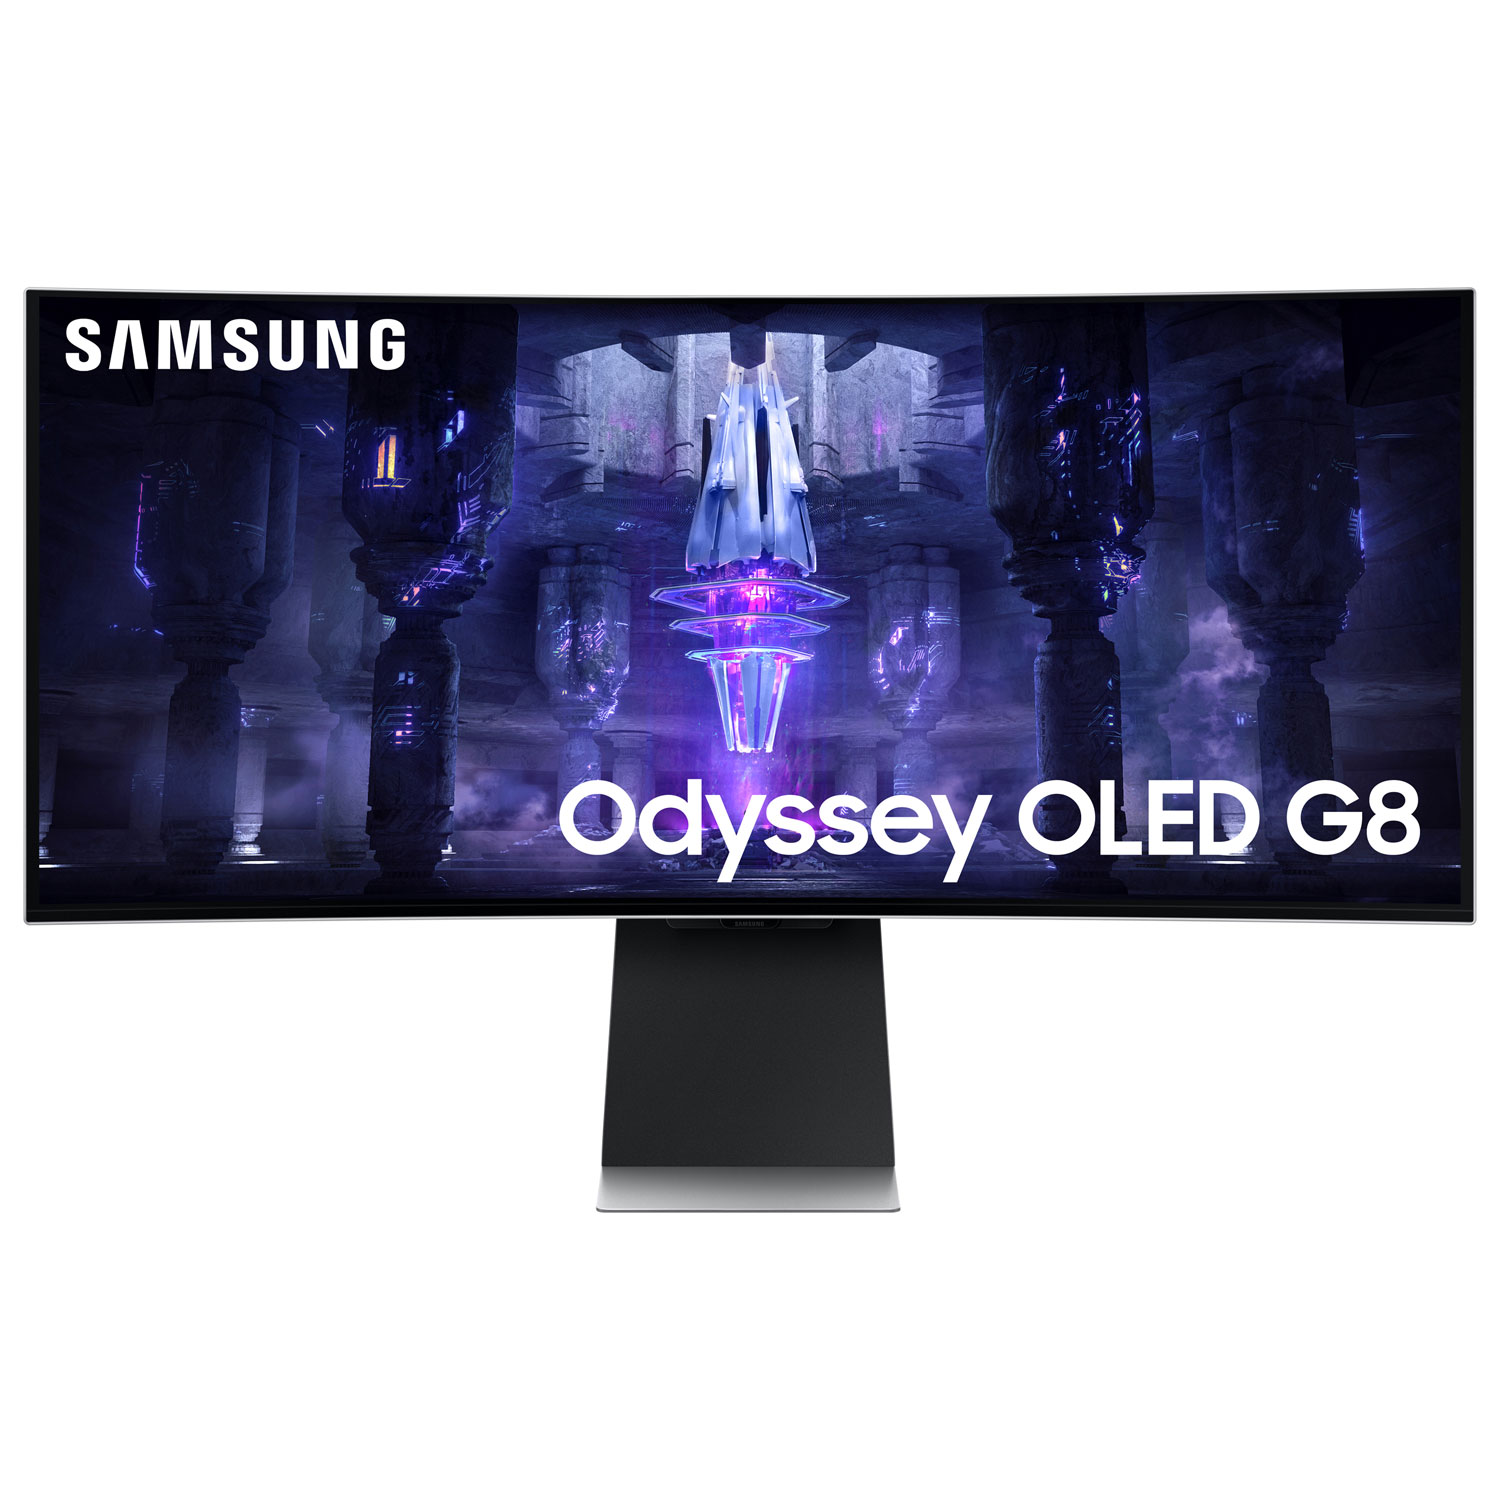 Samsung Odyssey G8 34" WQHD 175Hz 0.1ms GTG Curved OLED Gaming Monitor (LS34BG850SNXZA) -Exclusive Retail Partner